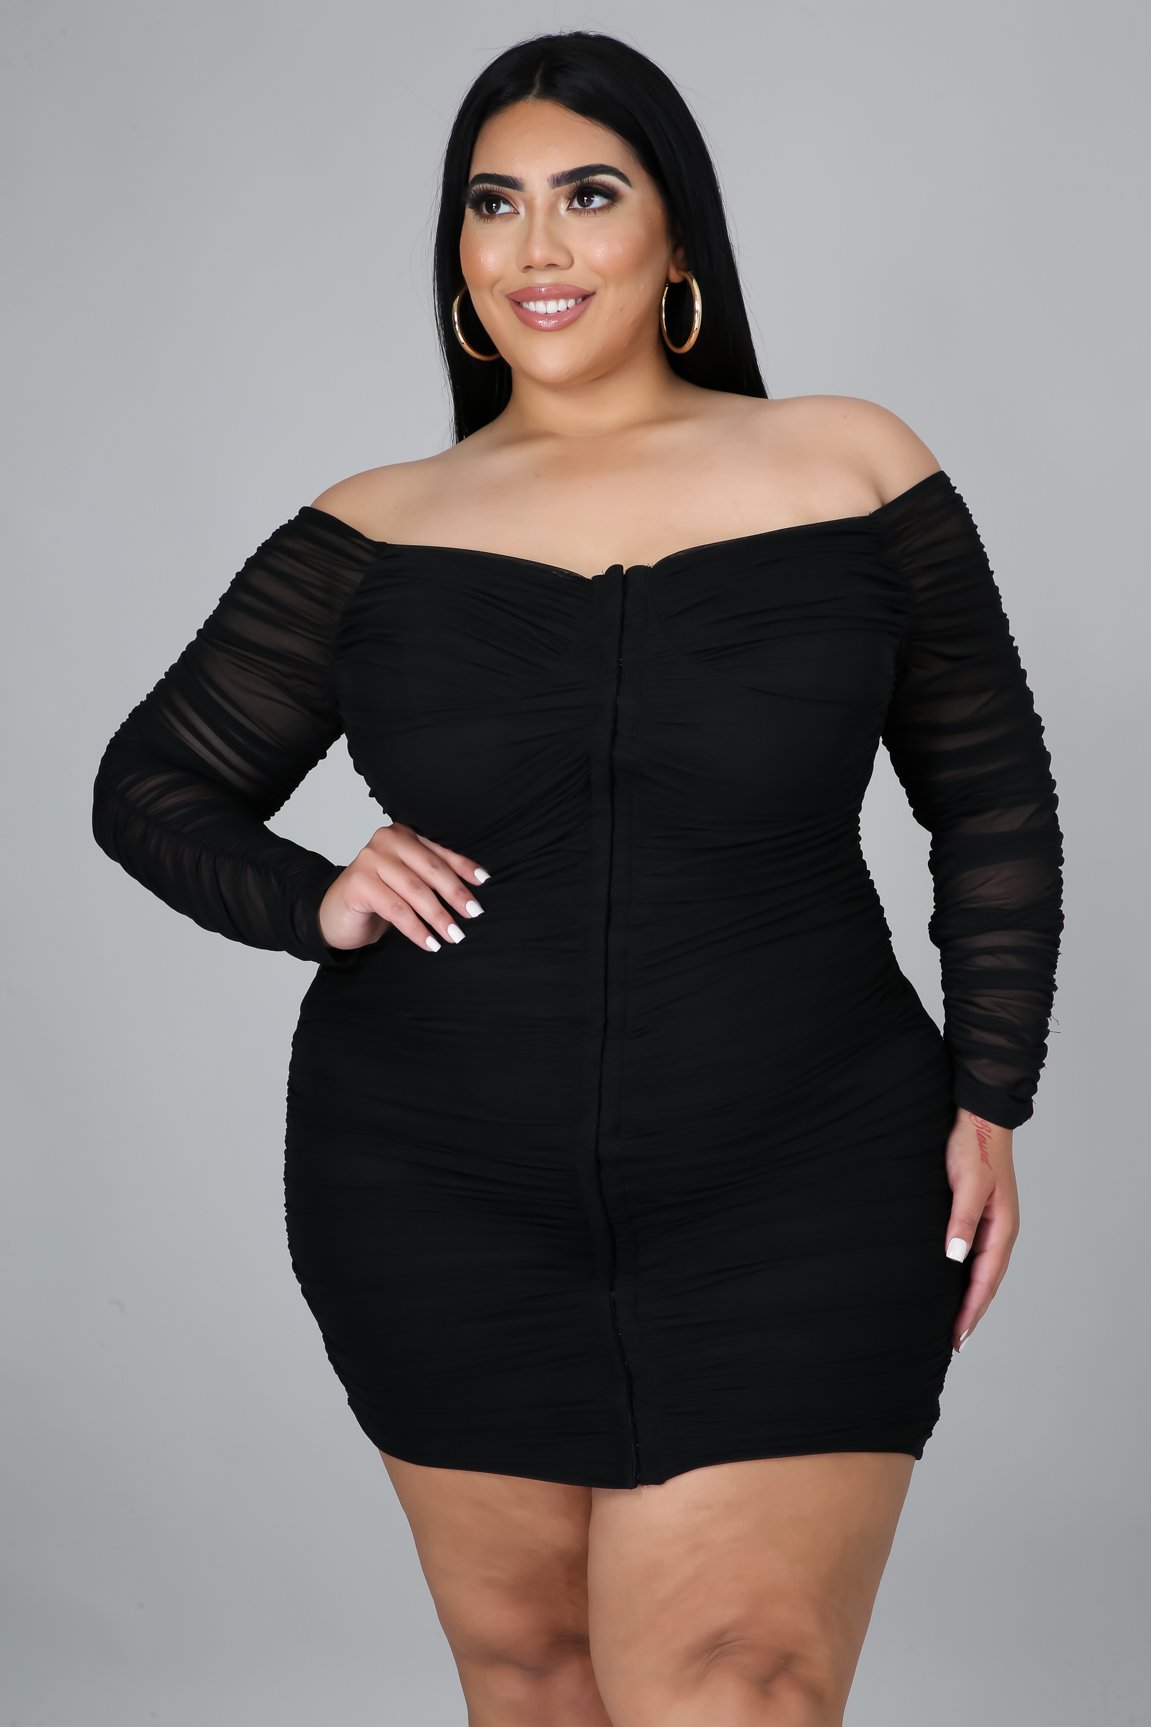 Tonight Im Yours Dress Plus is the perfect black dress, has amazing stretch with a corset style look, with hook closure. Ruched throughout, Long sheer sleeves with a off the shoulder look.